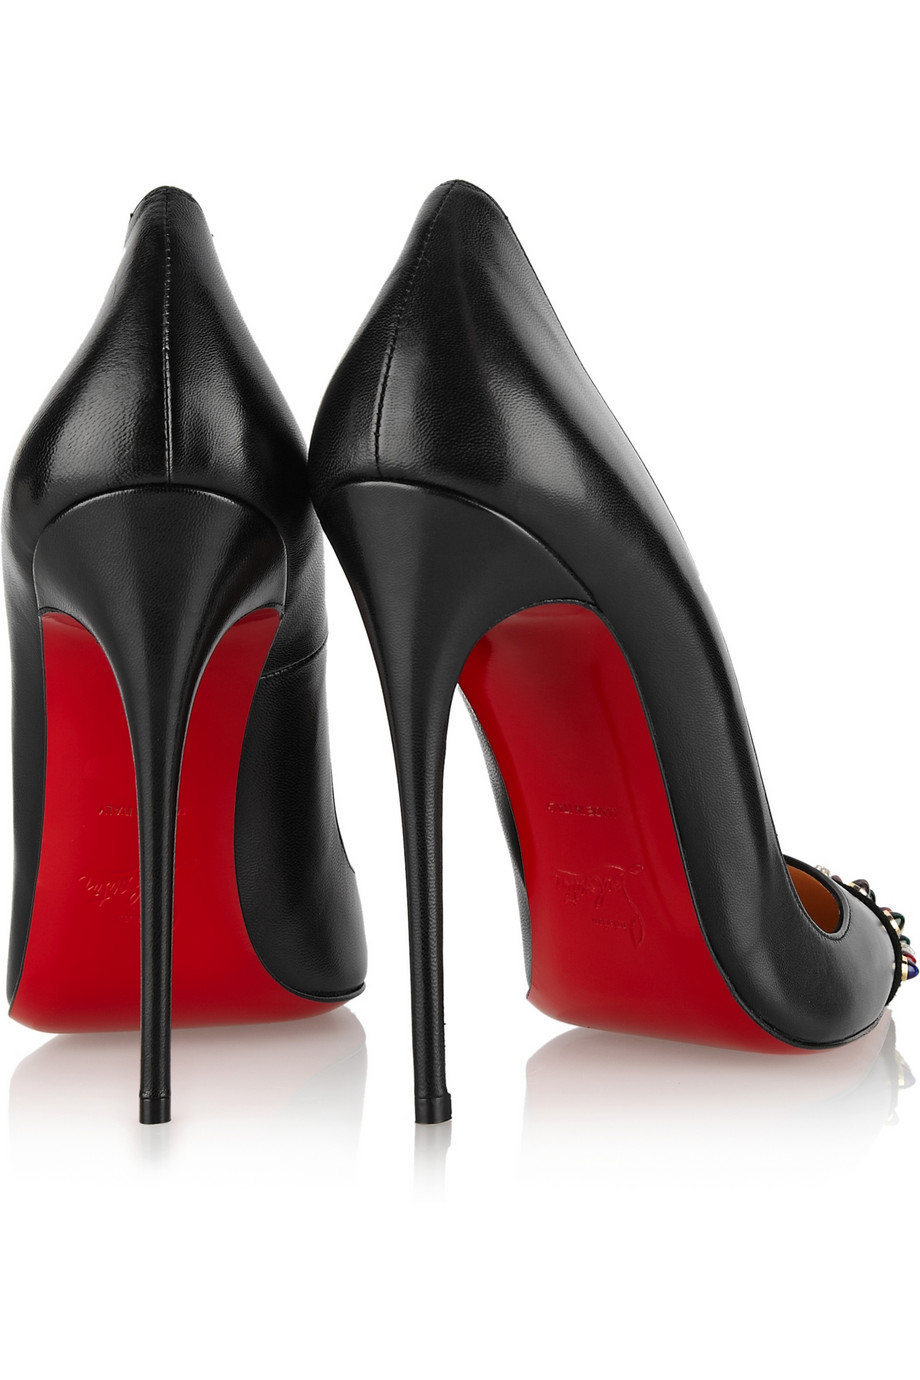 christian-louboutin-black-cabo-120-embellished-leather-pumps-product-1-23614366-2-209233411-normal.jpeg  